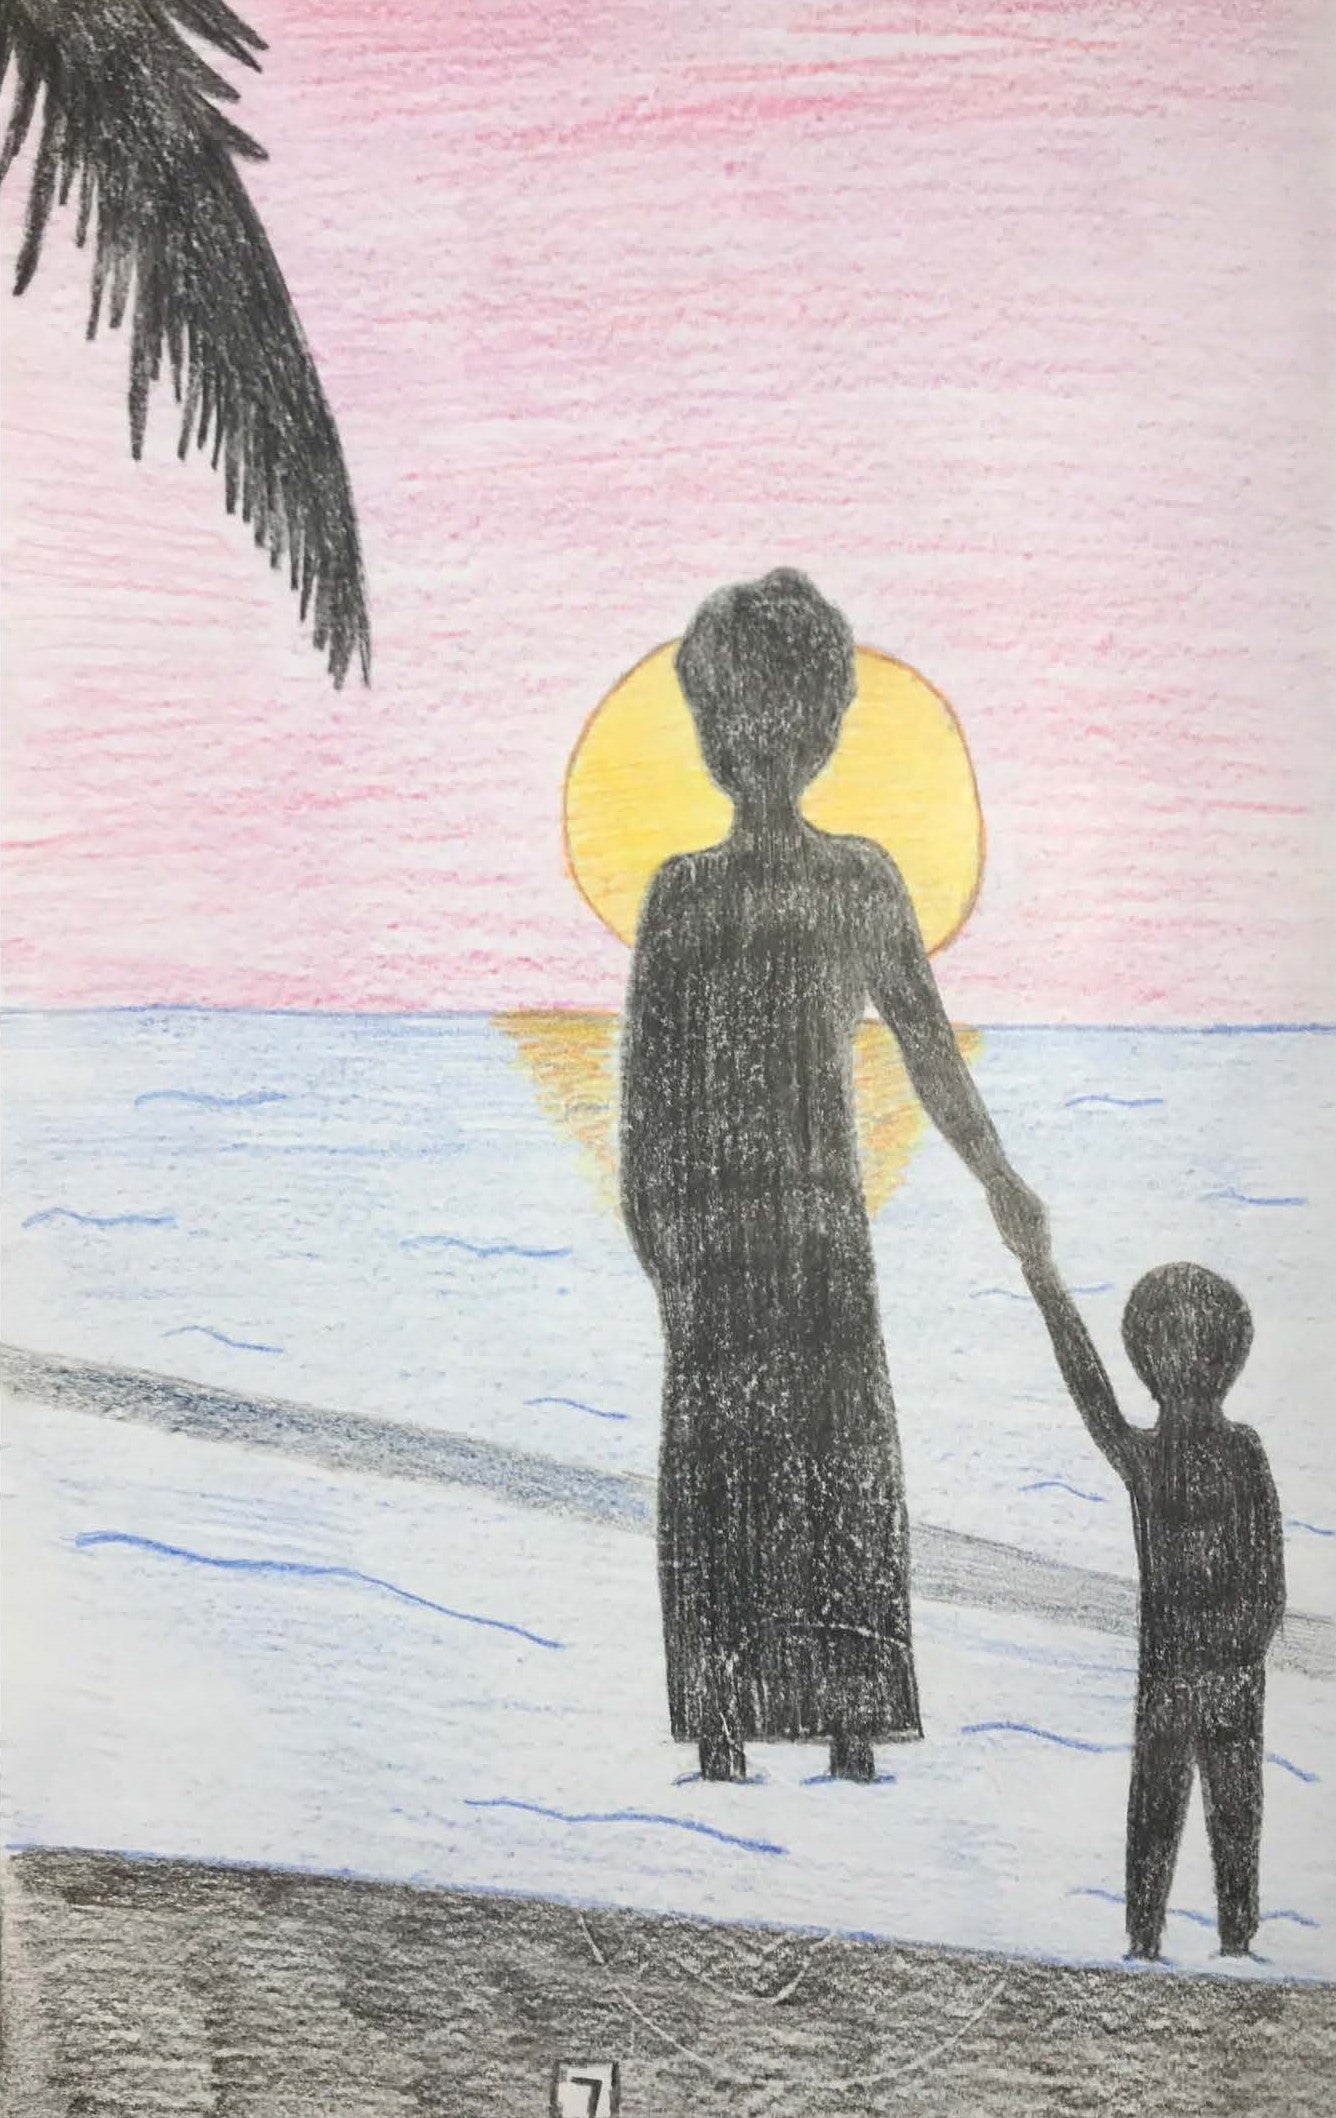 Sycorax and Caliban. Drawing by Mary Olsen, 2020. Image reproduced with permission.